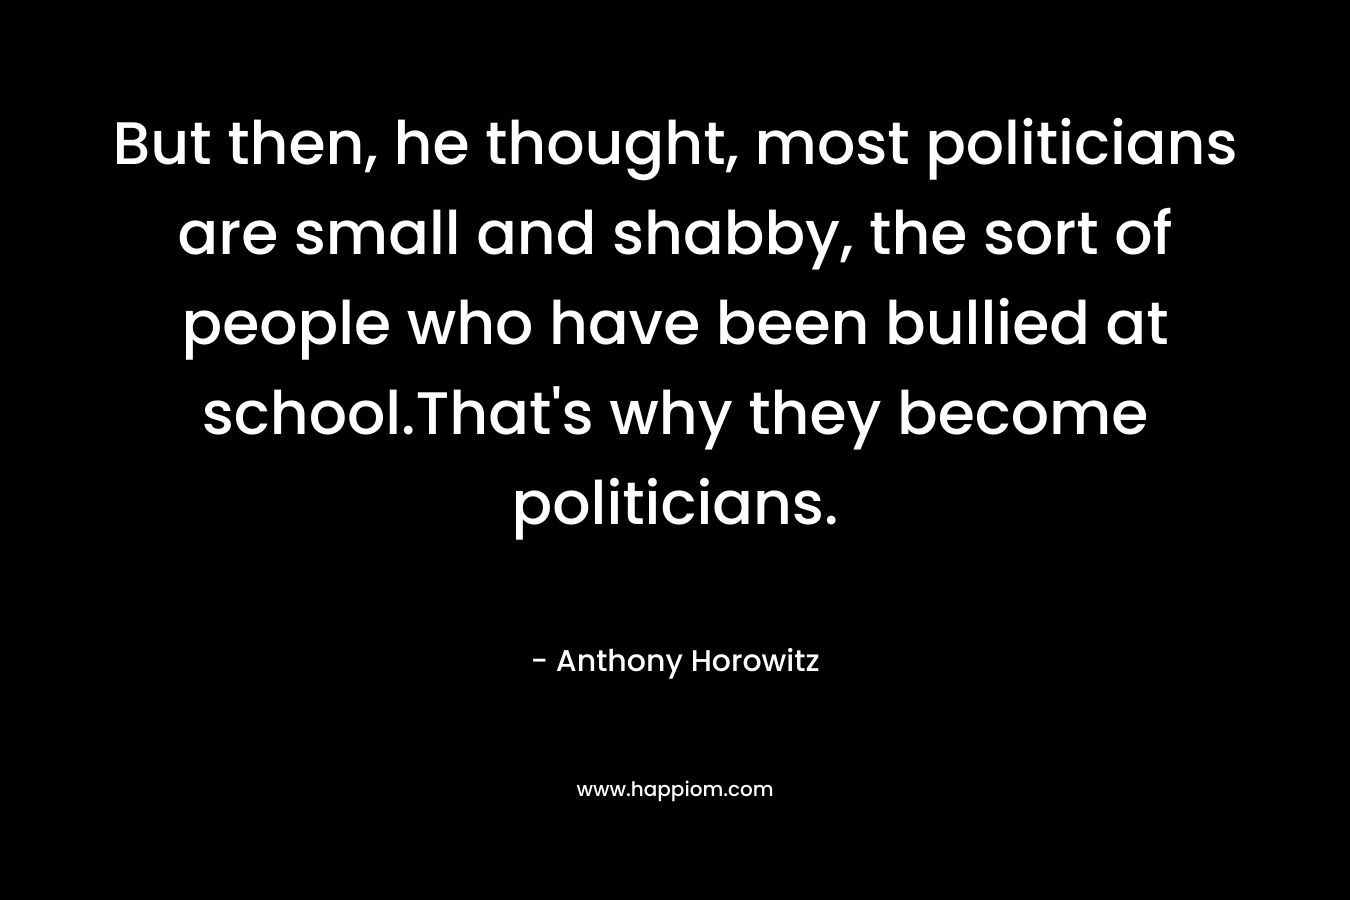 But then, he thought, most politicians are small and shabby, the sort of people who have been bullied at school.That’s why they become politicians. – Anthony Horowitz